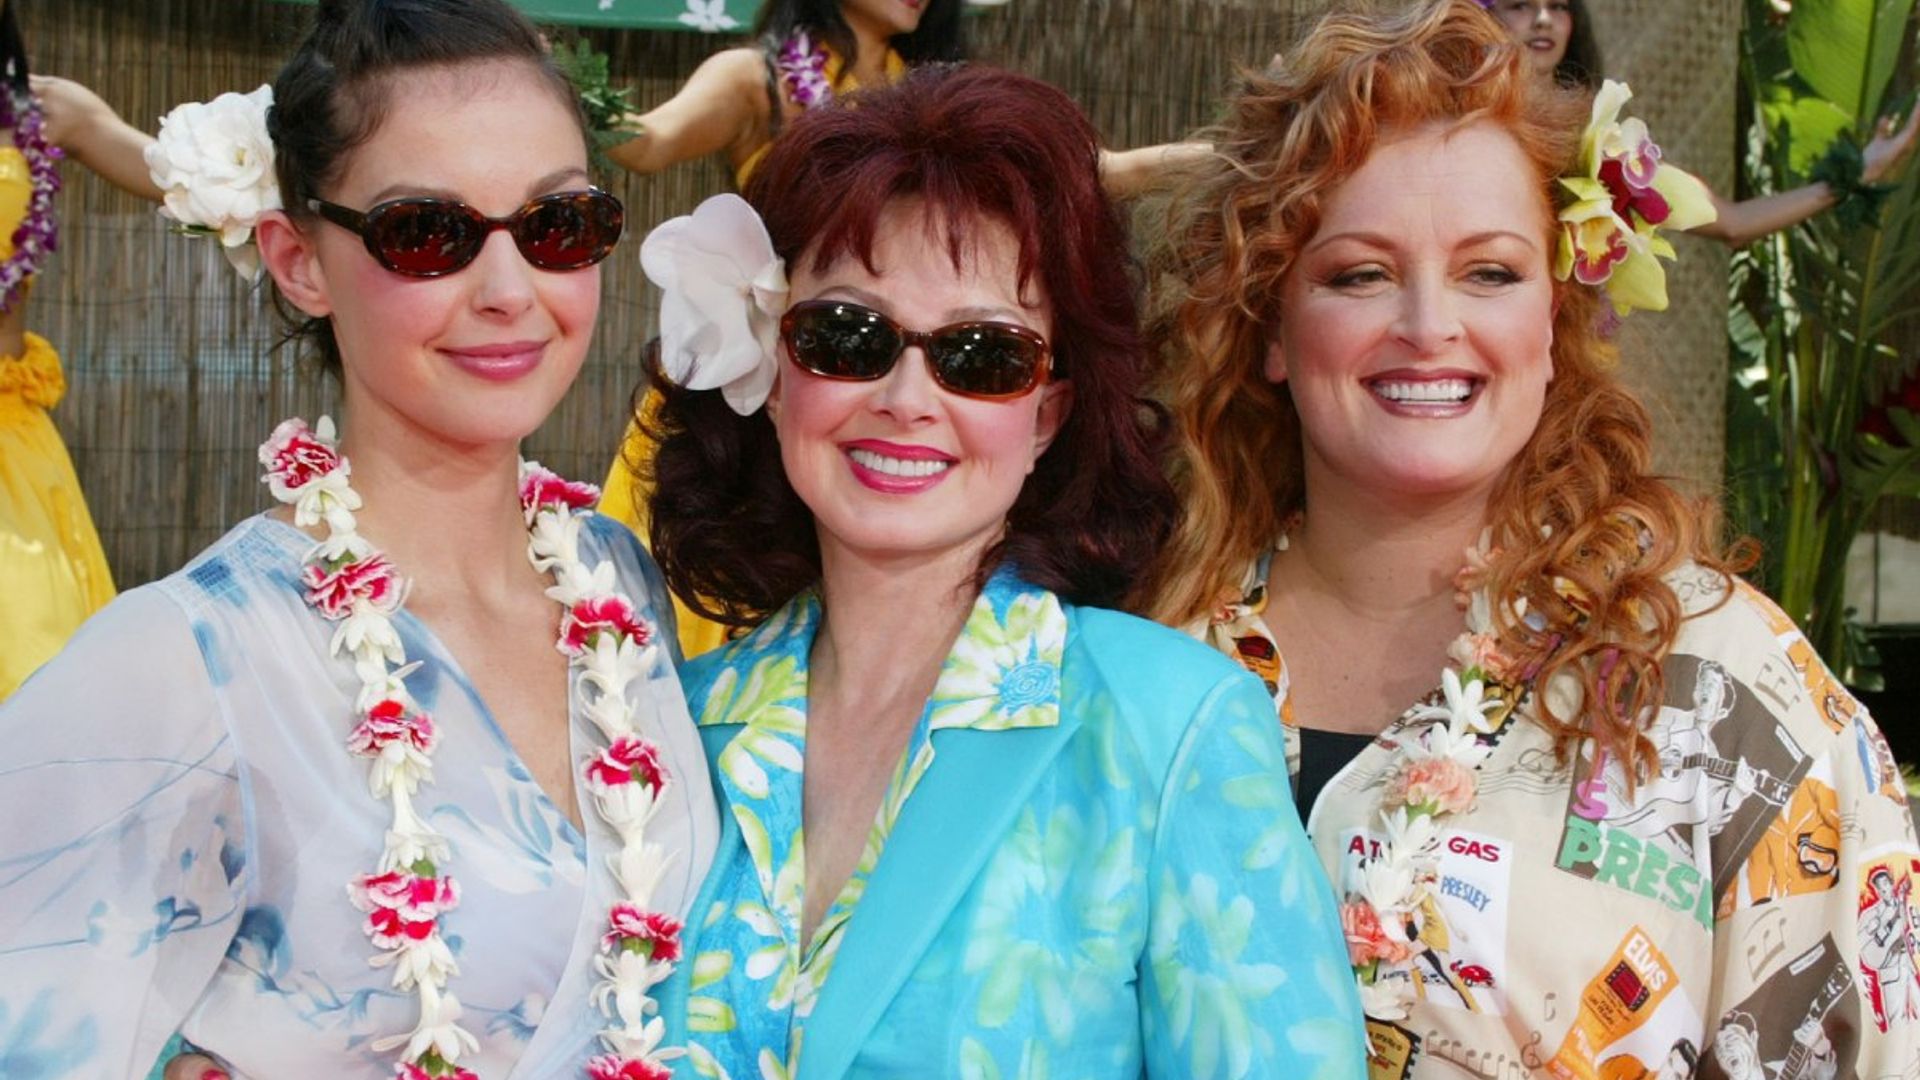 Ashley Judd And Sister Wynonna Suffer Further Heartbreak After Naomi Judds Will Revealed All 